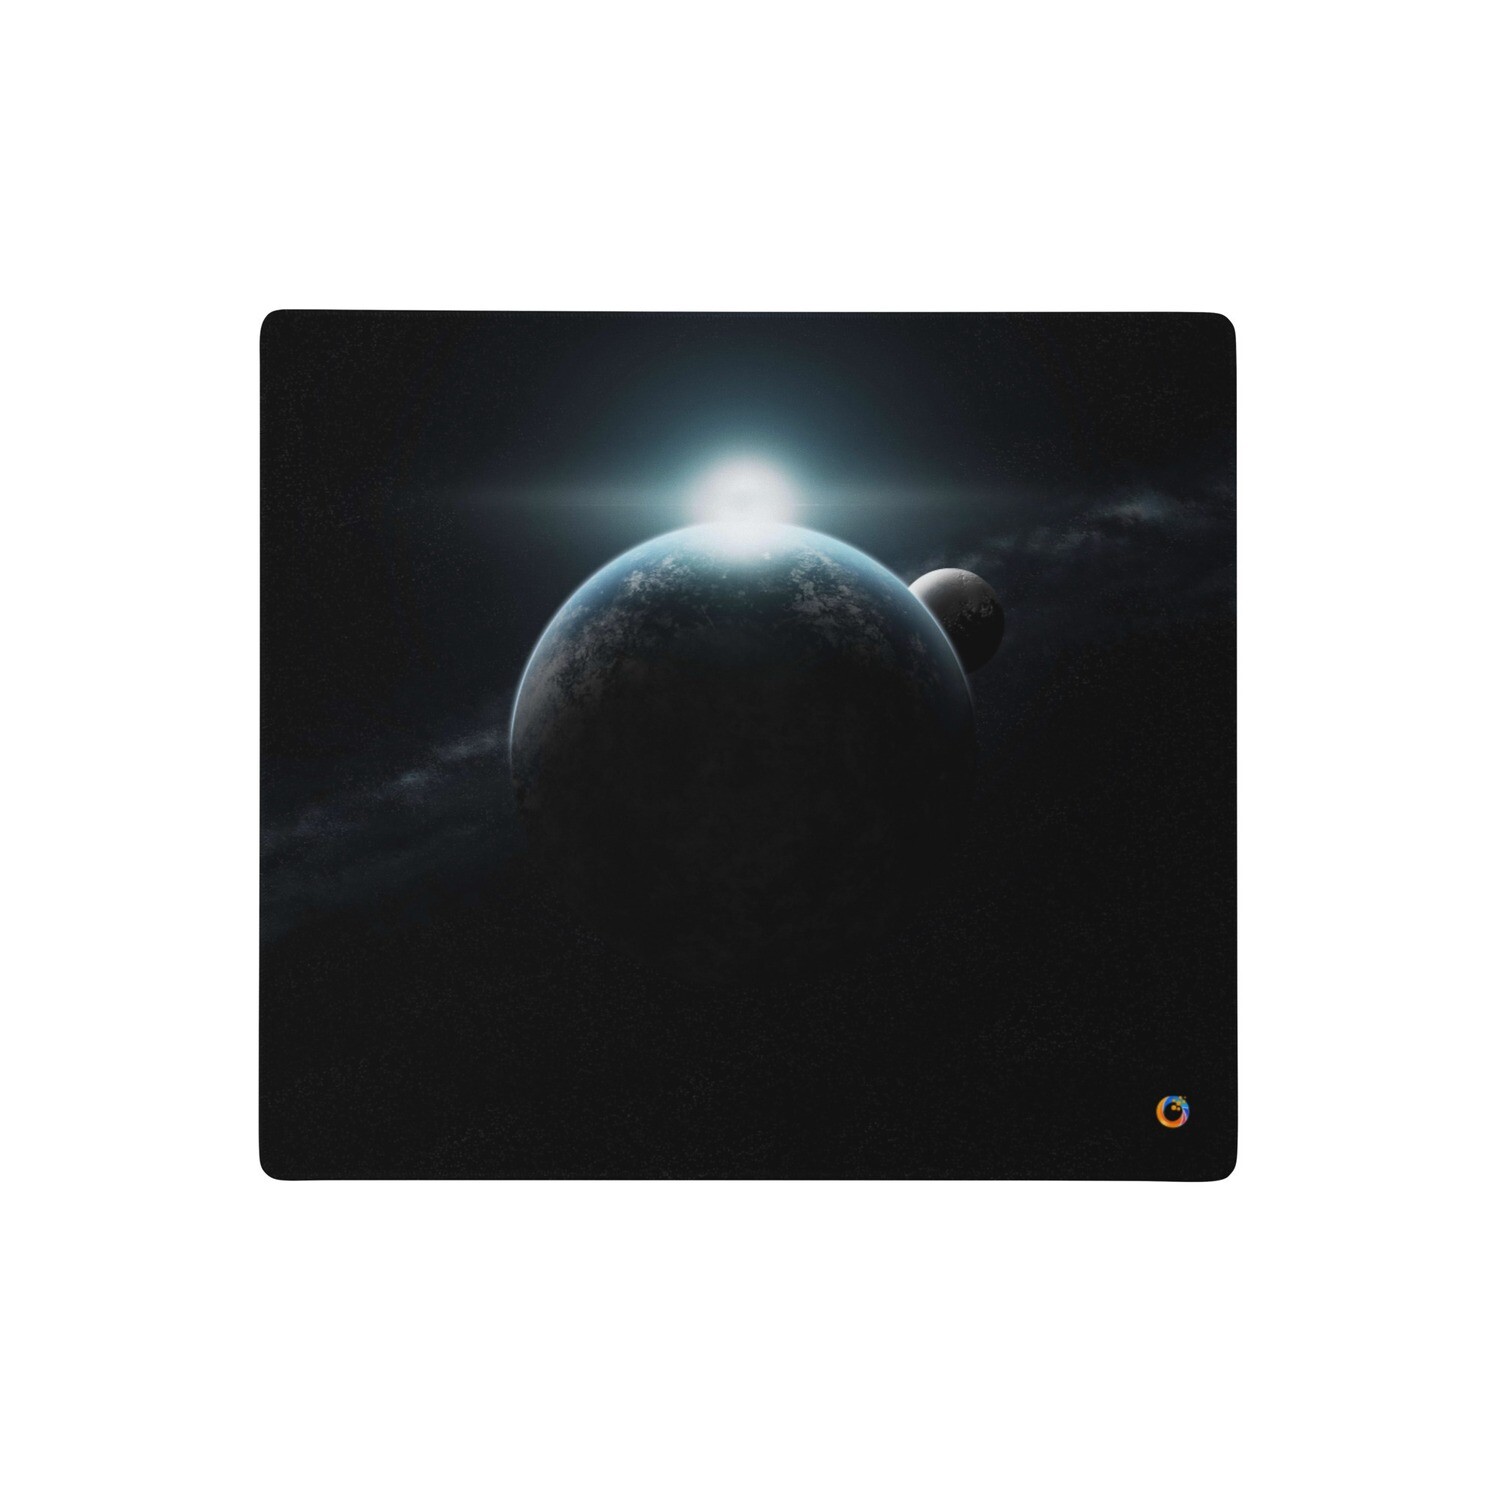 Gaming mouse pad #5